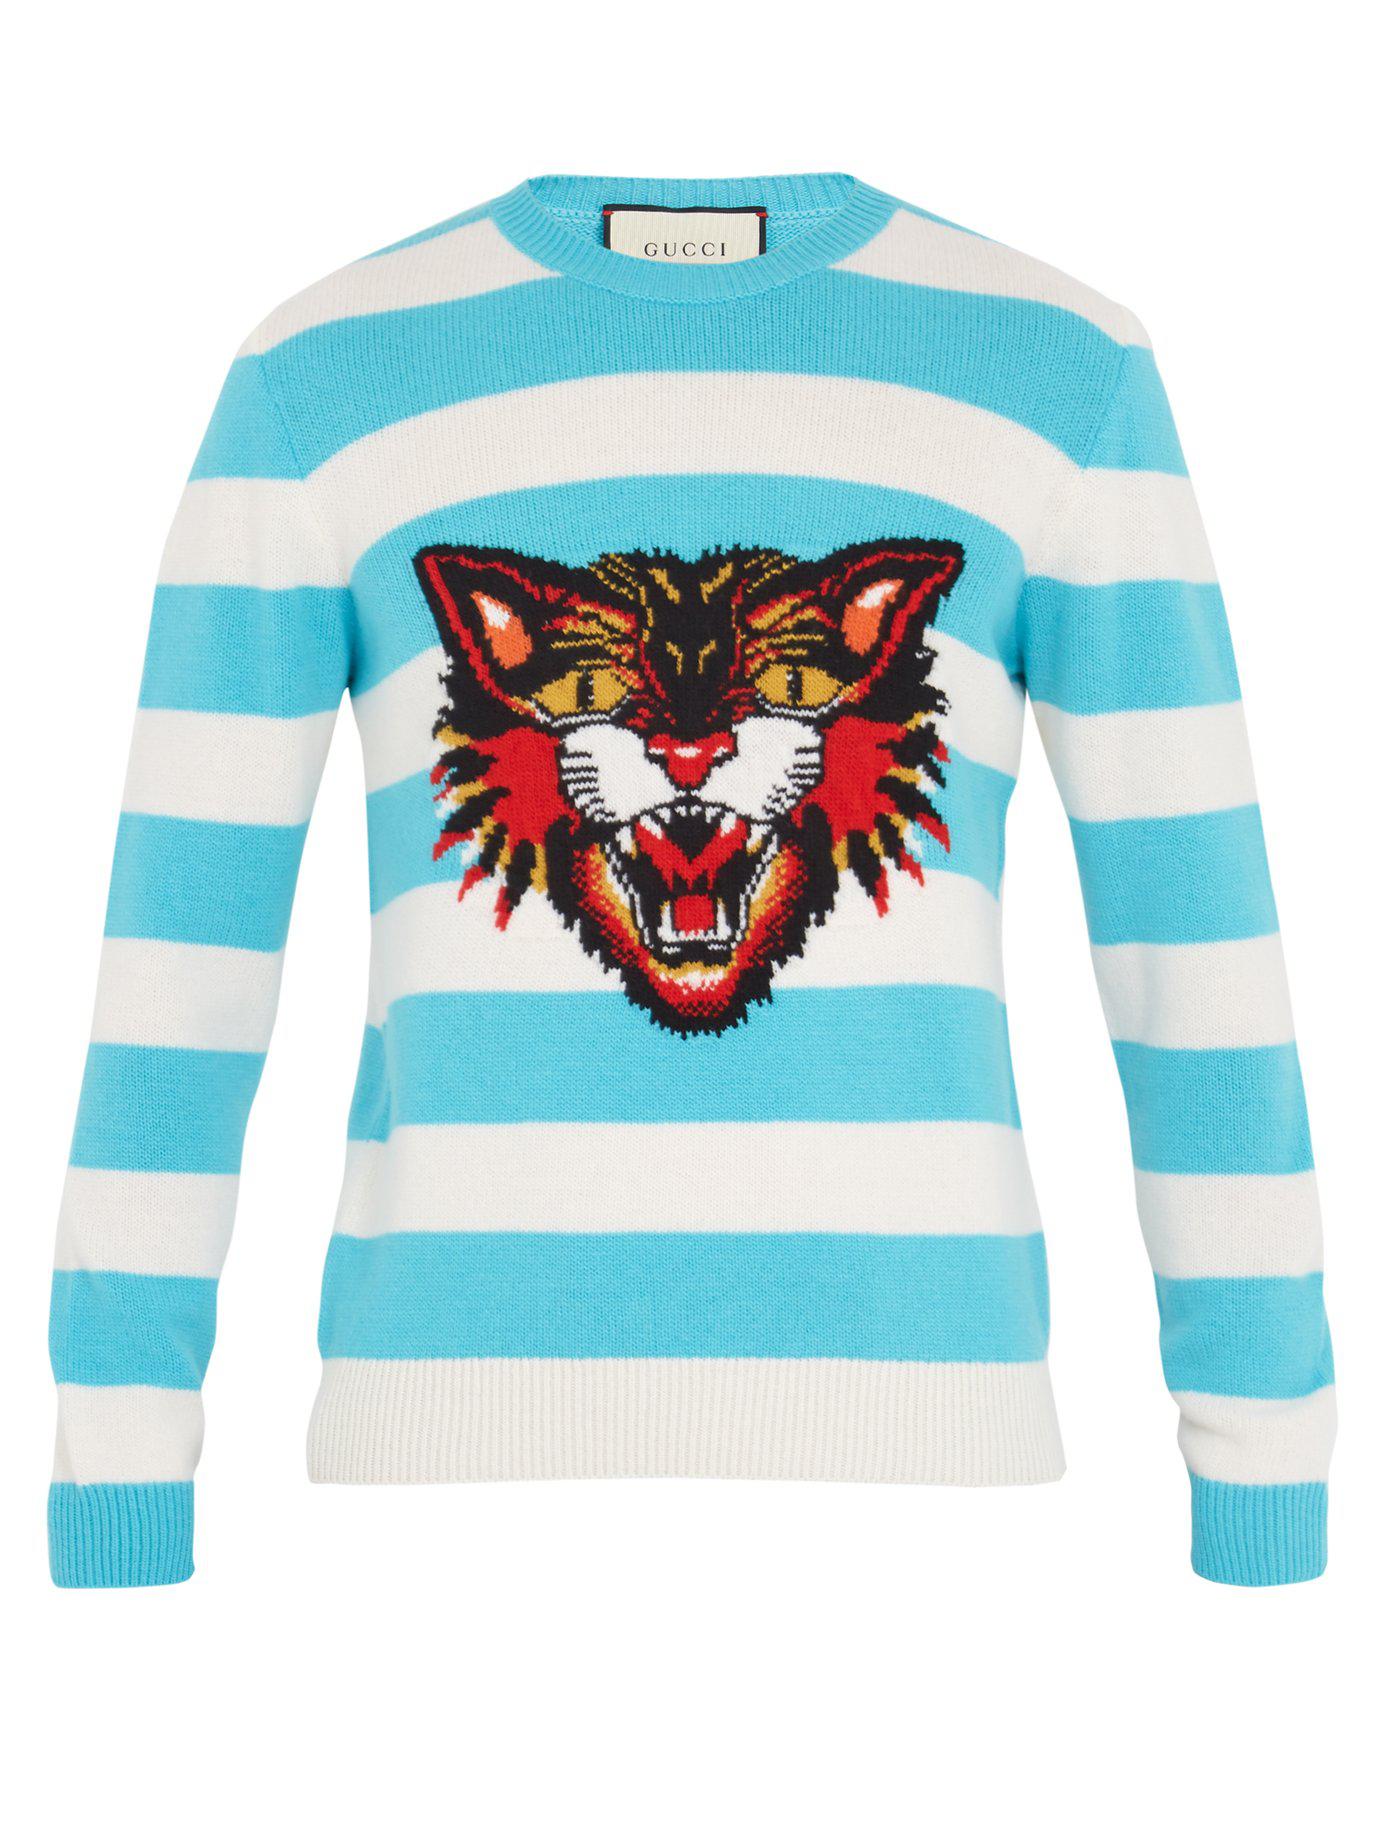 Gucci Angry Cat-intarsia Striped Wool Sweater in Blue for Men - Lyst